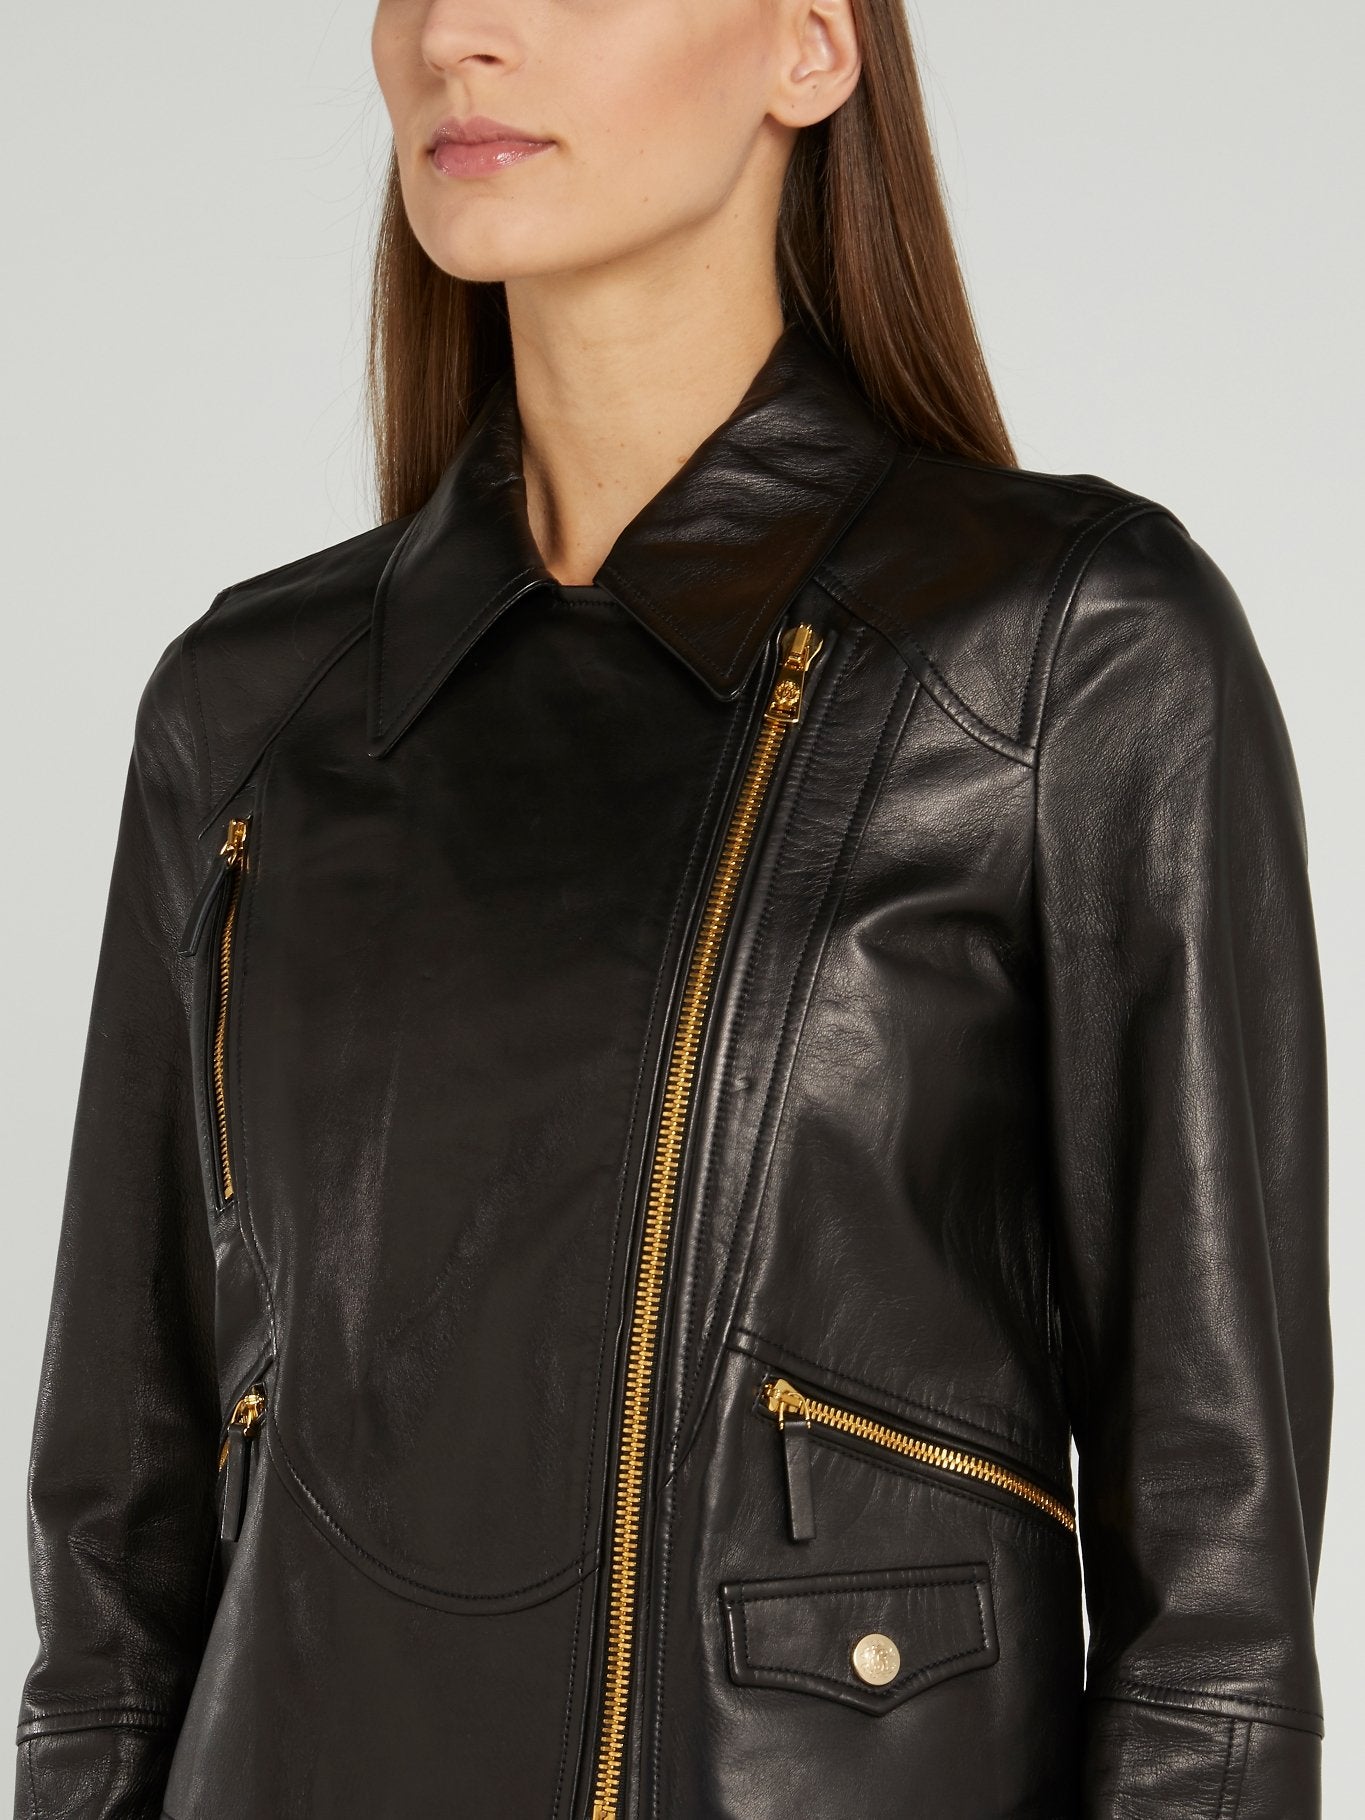 Black Wide-Collared Leather Jacket